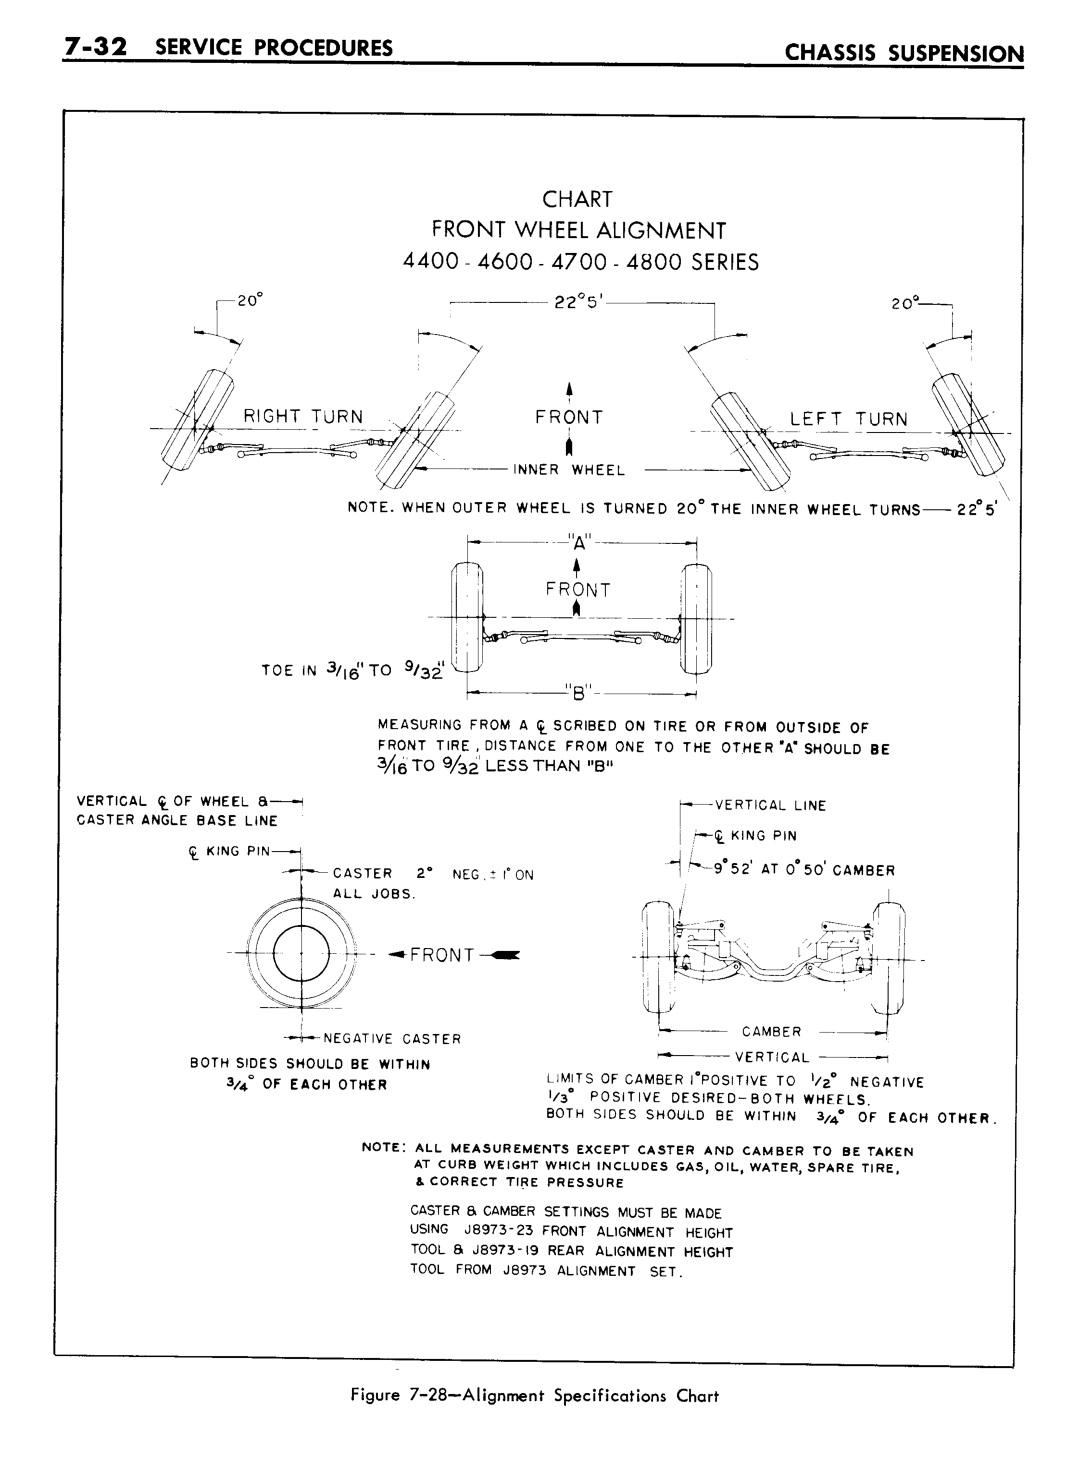 n_07 1961 Buick Shop Manual - Chassis Suspension-032-032.jpg